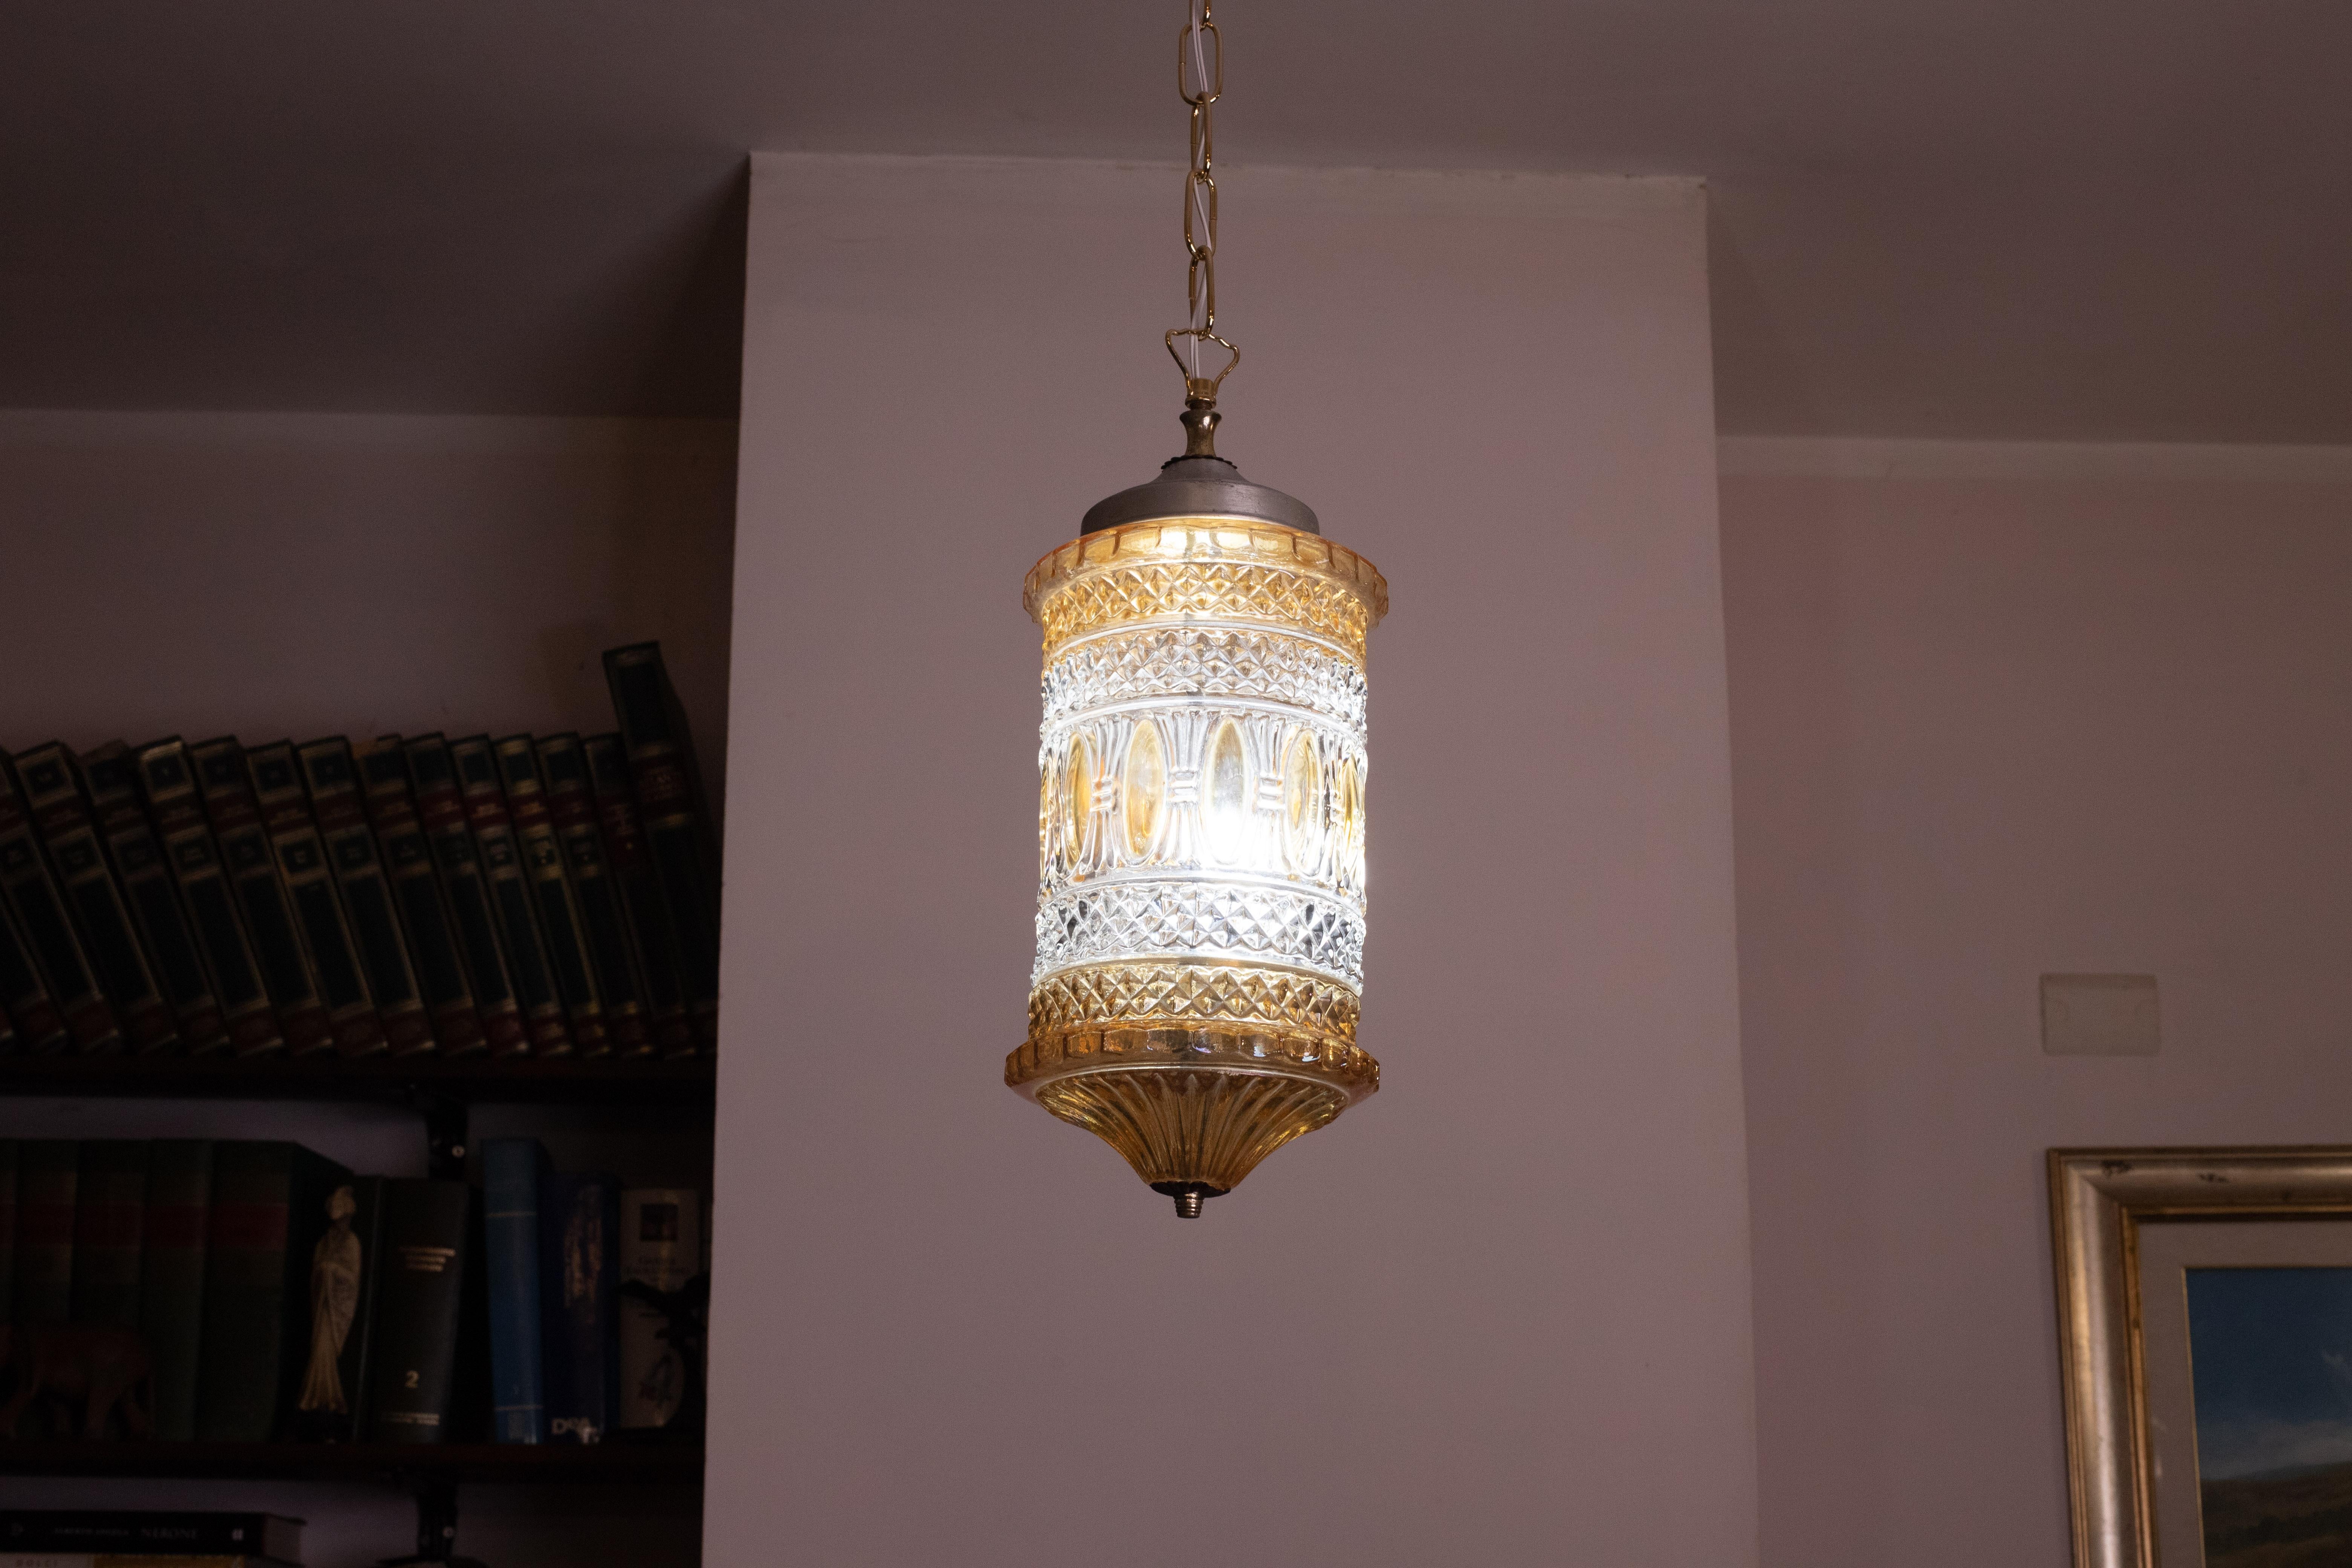 Stupendous oriental style glass lantern.

Approximately 1960 period.

The lantern is suitable for decorating a small space such as an entrance hall or a room, the light it gives off making a pleasant warm atmosphere.

The lamp is 110